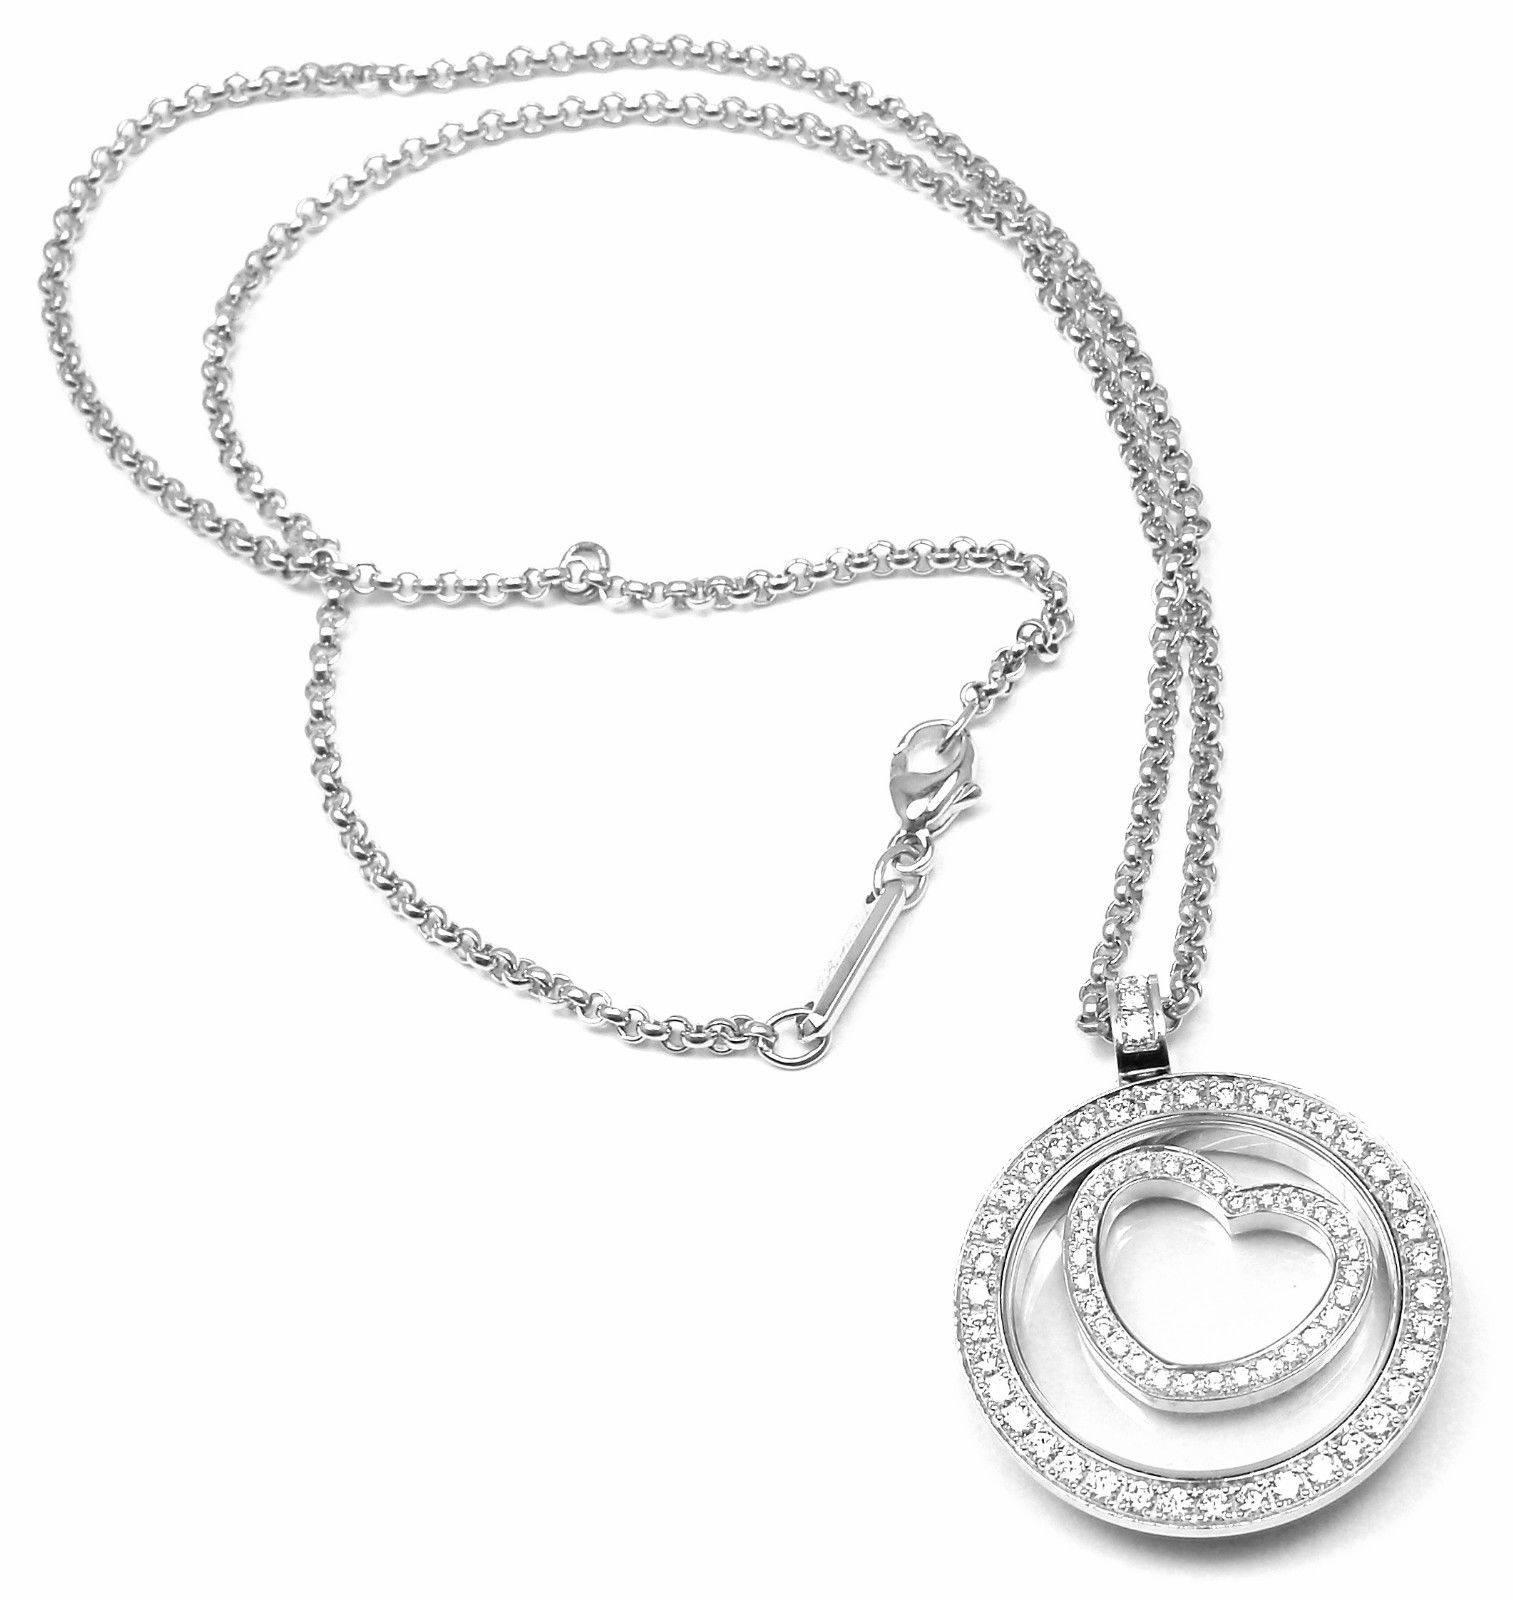 18k White Gold Diamond Floating Heart Necklace by Chopard. 
With 72 Total Diamonds, VS1 Clarity, G Color. Total Diamond Weight: 1.20CT. 

Details: 
Chain Length: 16.5